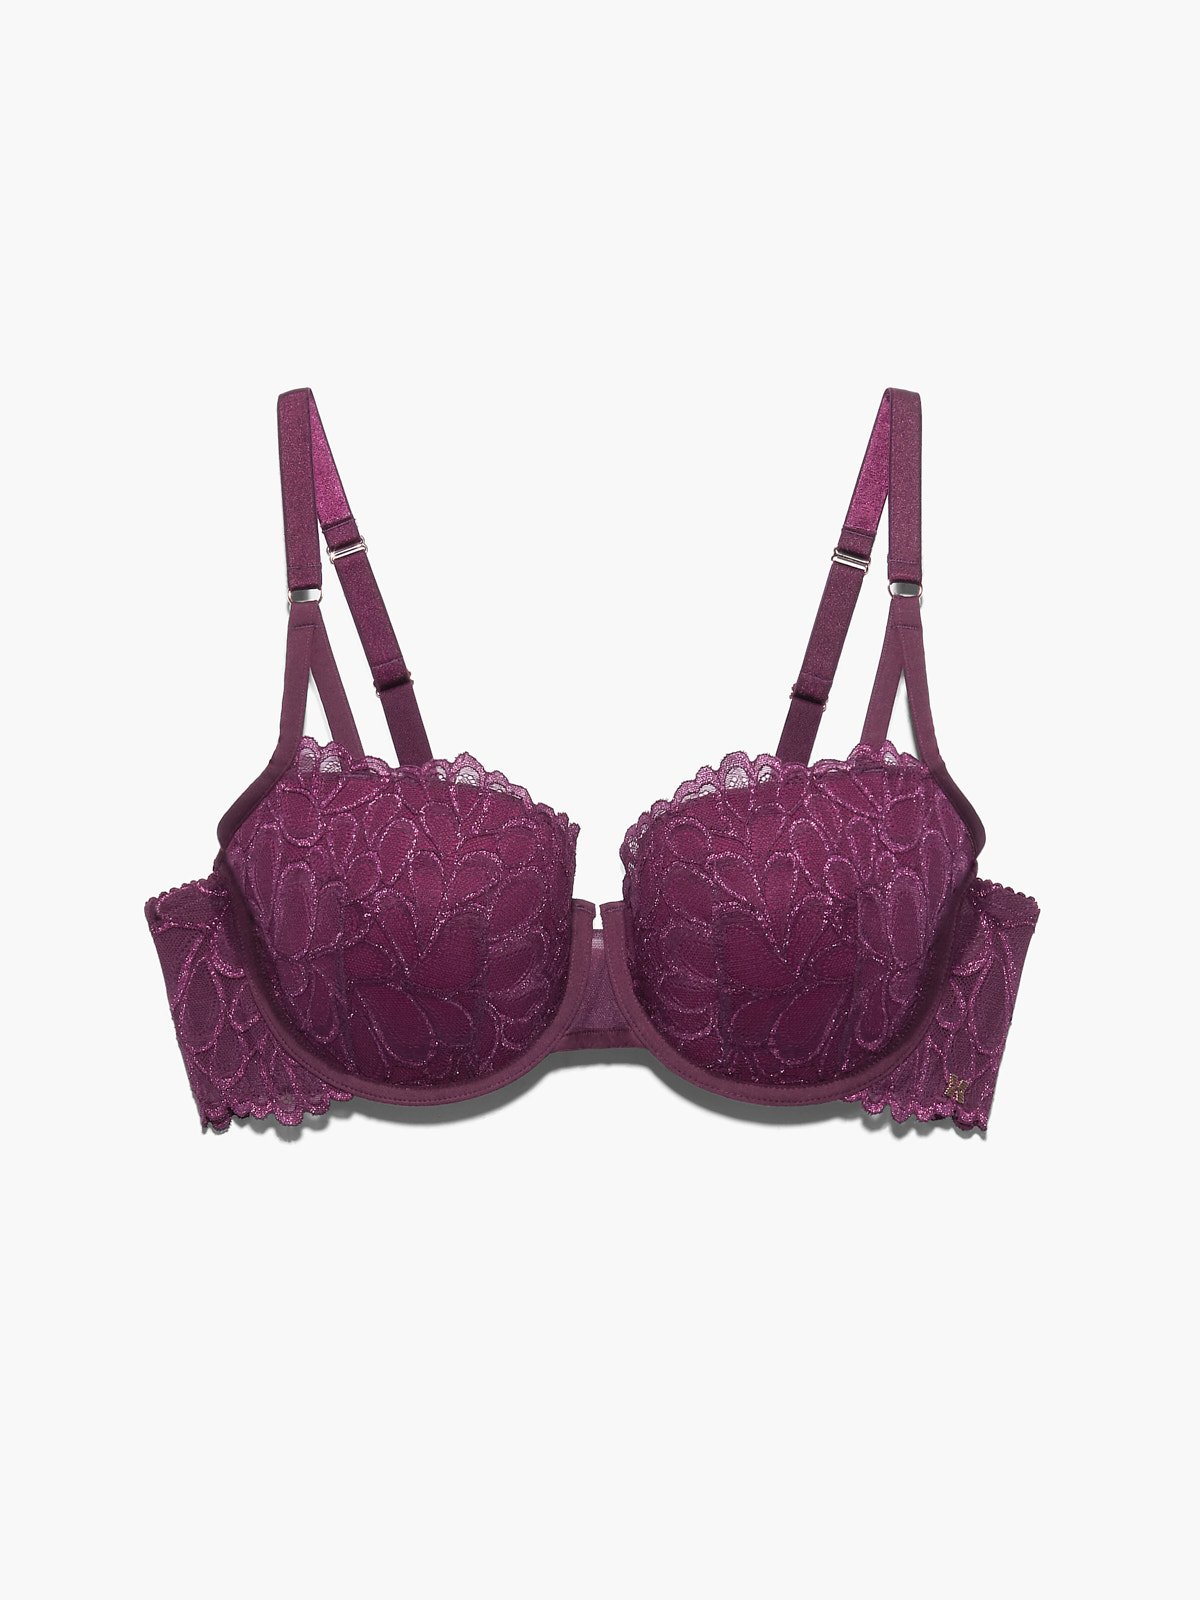 https://cdn.savagex.com/media/images/products/BA2044111-5179/SAVAGE-NOT-SORRY-LIGHTLY-LINED-LACE-BALCONETTE-BRA-BA2044111-5179-LAYDOWN-1200x1600.jpg